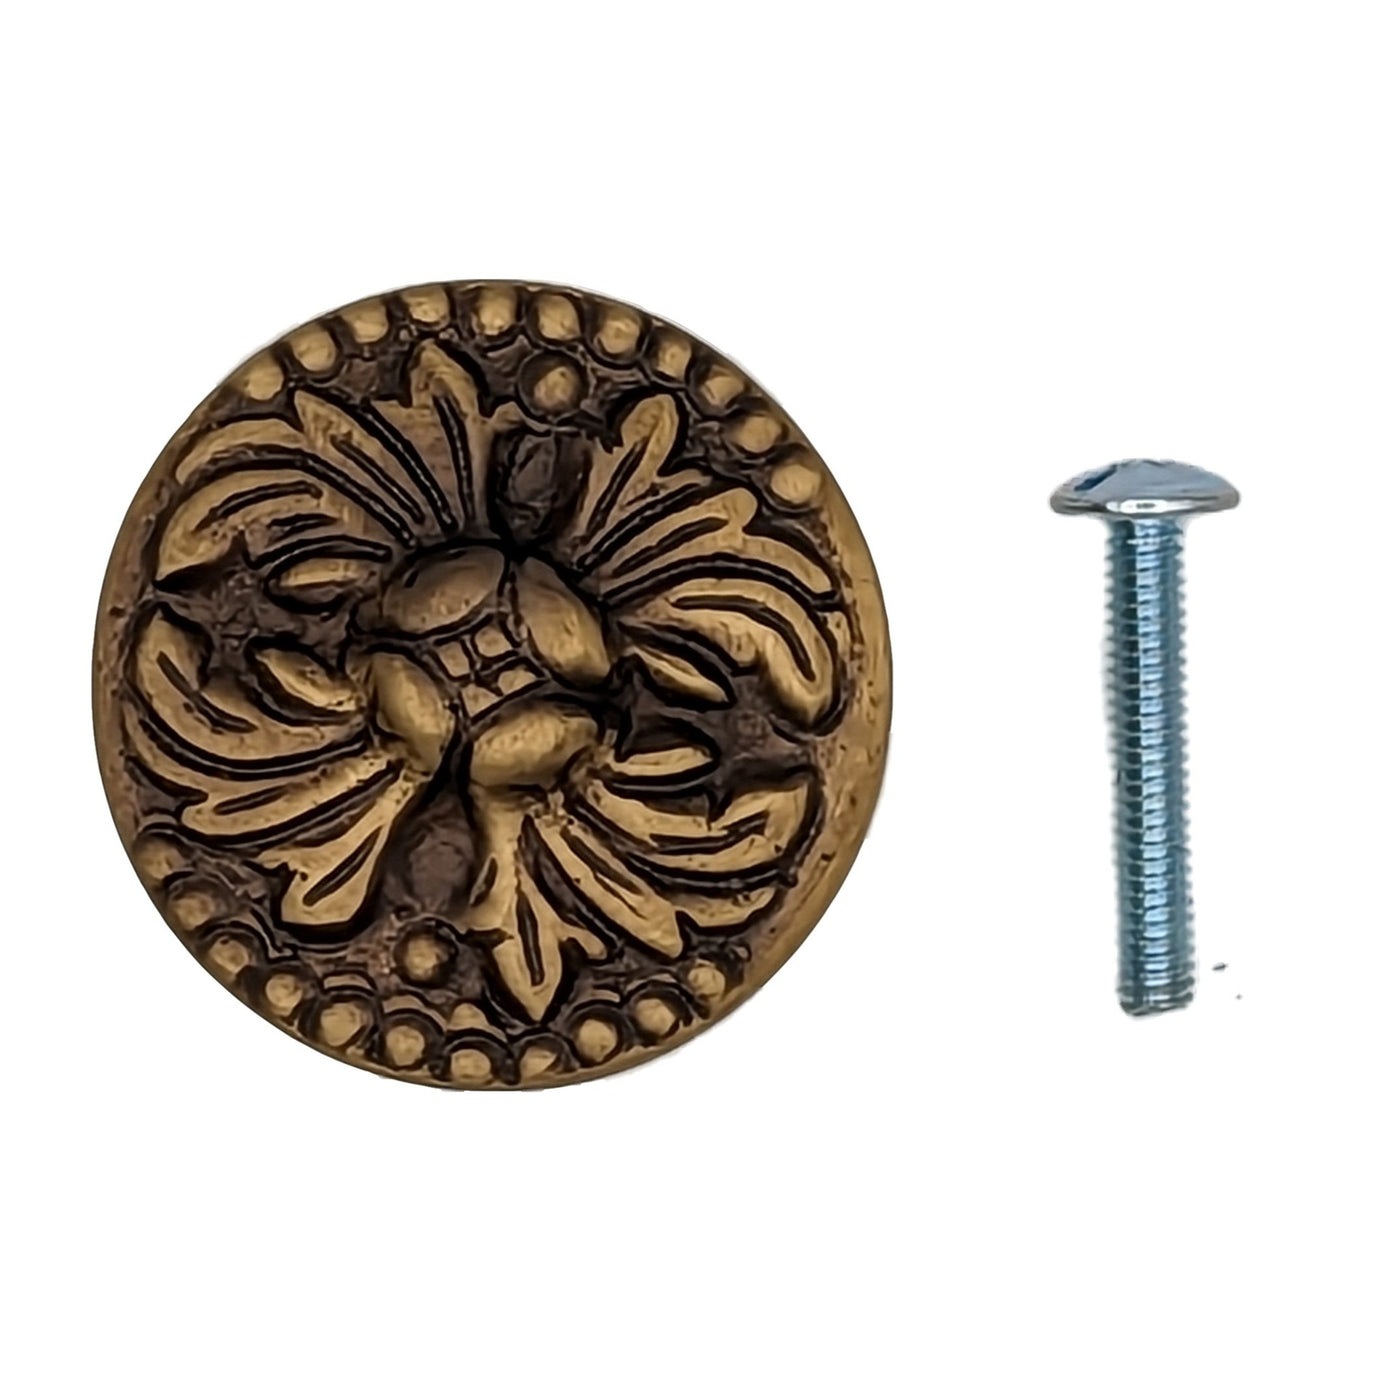 1 1/2 Inch Solid Brass Designer Rococo Cabinet Knob (Several Finishes Available)